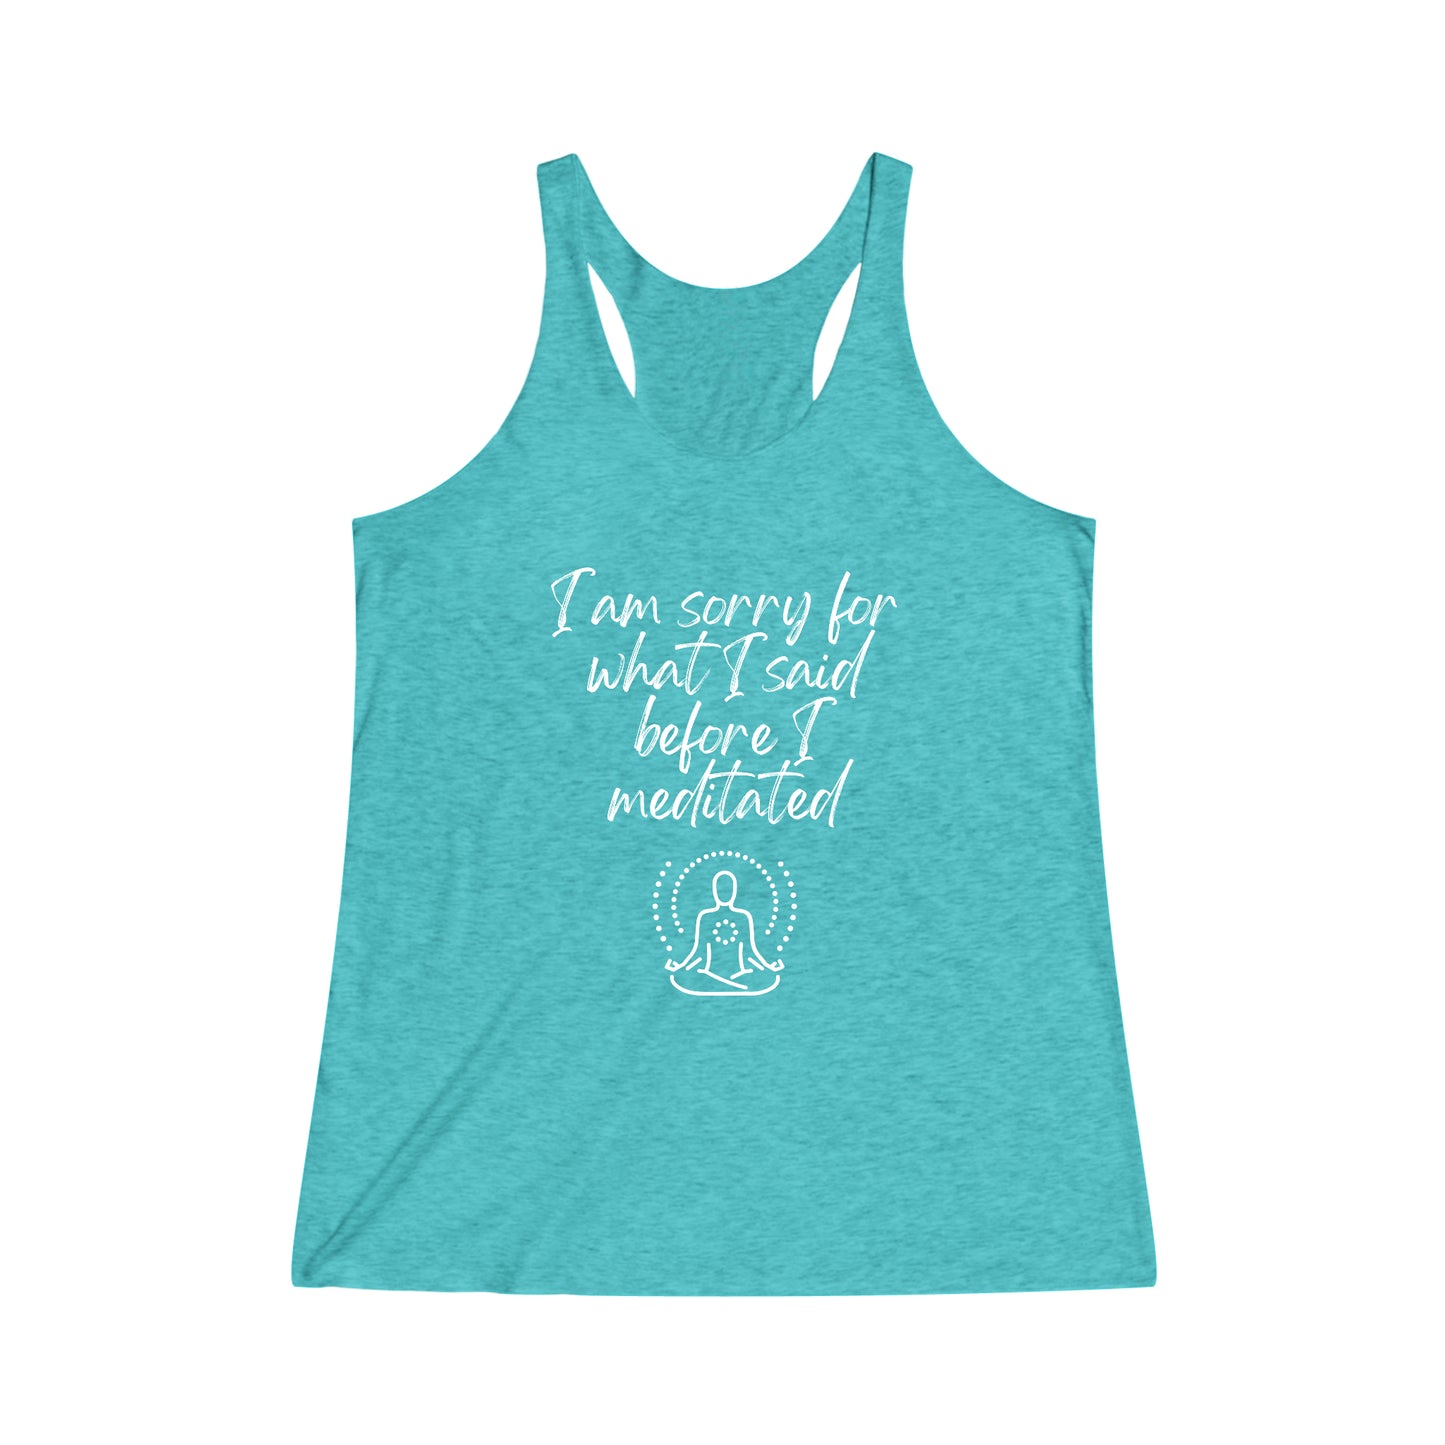 I am sorry for what I said before I meditated! Women's Tri-Blend Racerback Inspirational Tank top